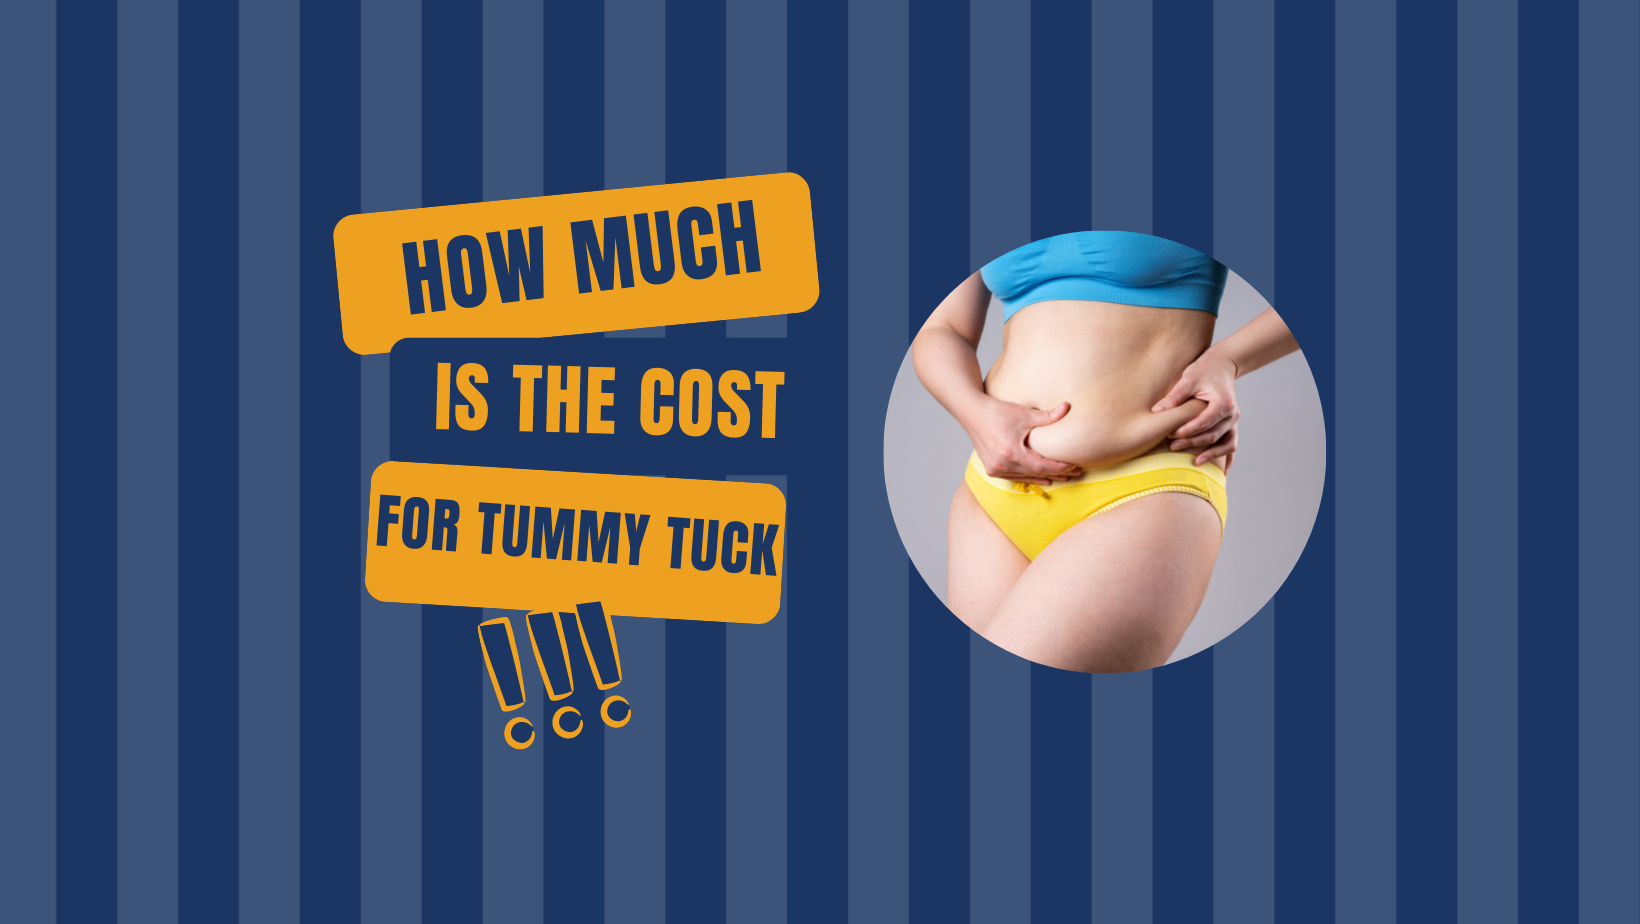 How much is the cost for tummy tuck?